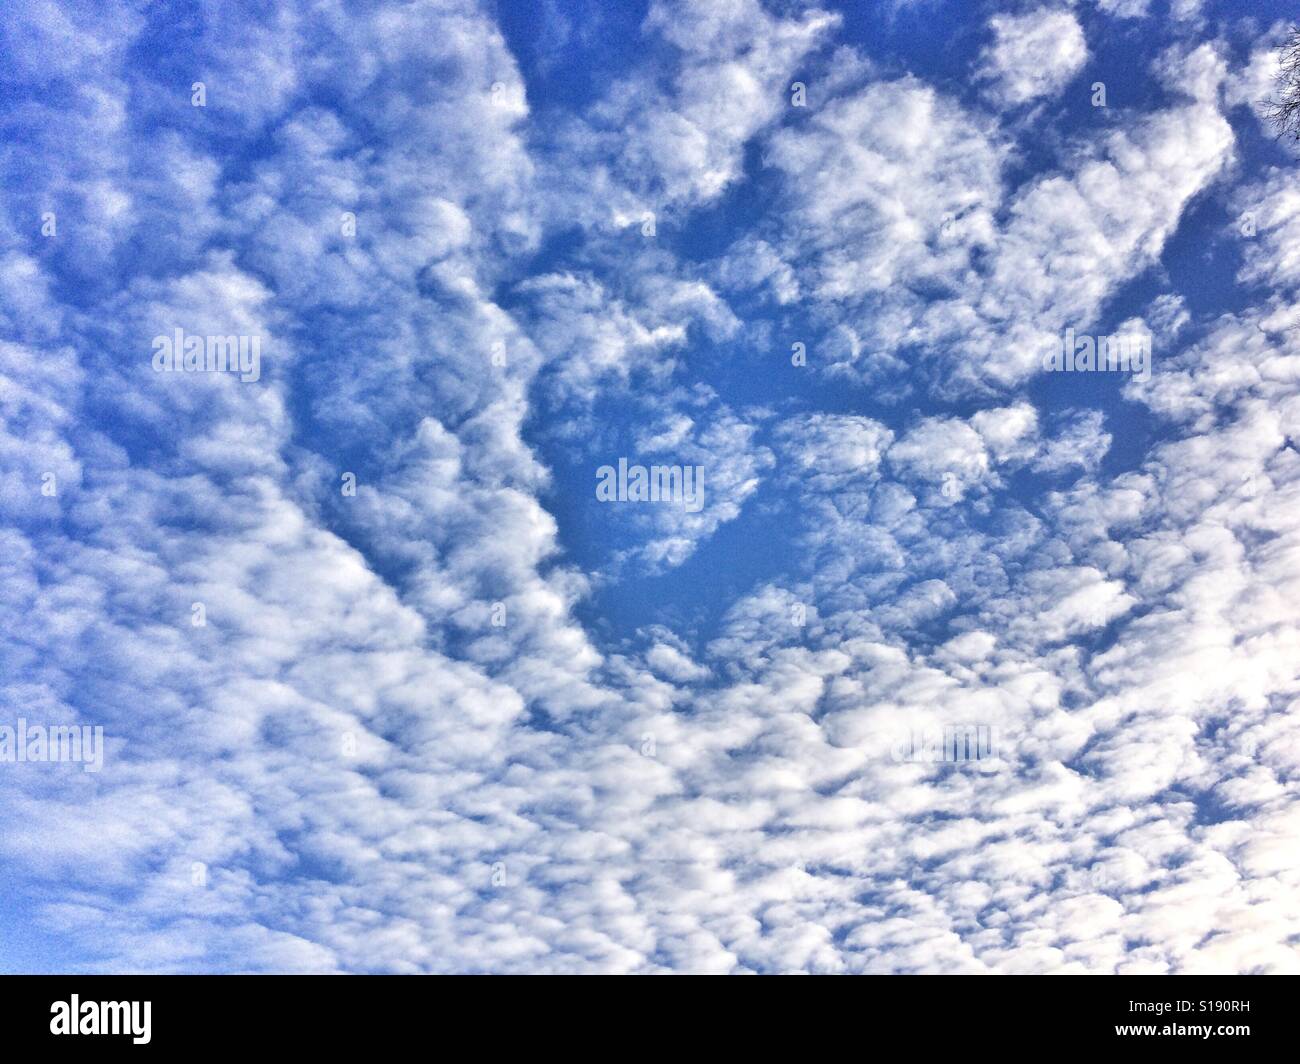 Blue sky with white clouds. Stock Photo